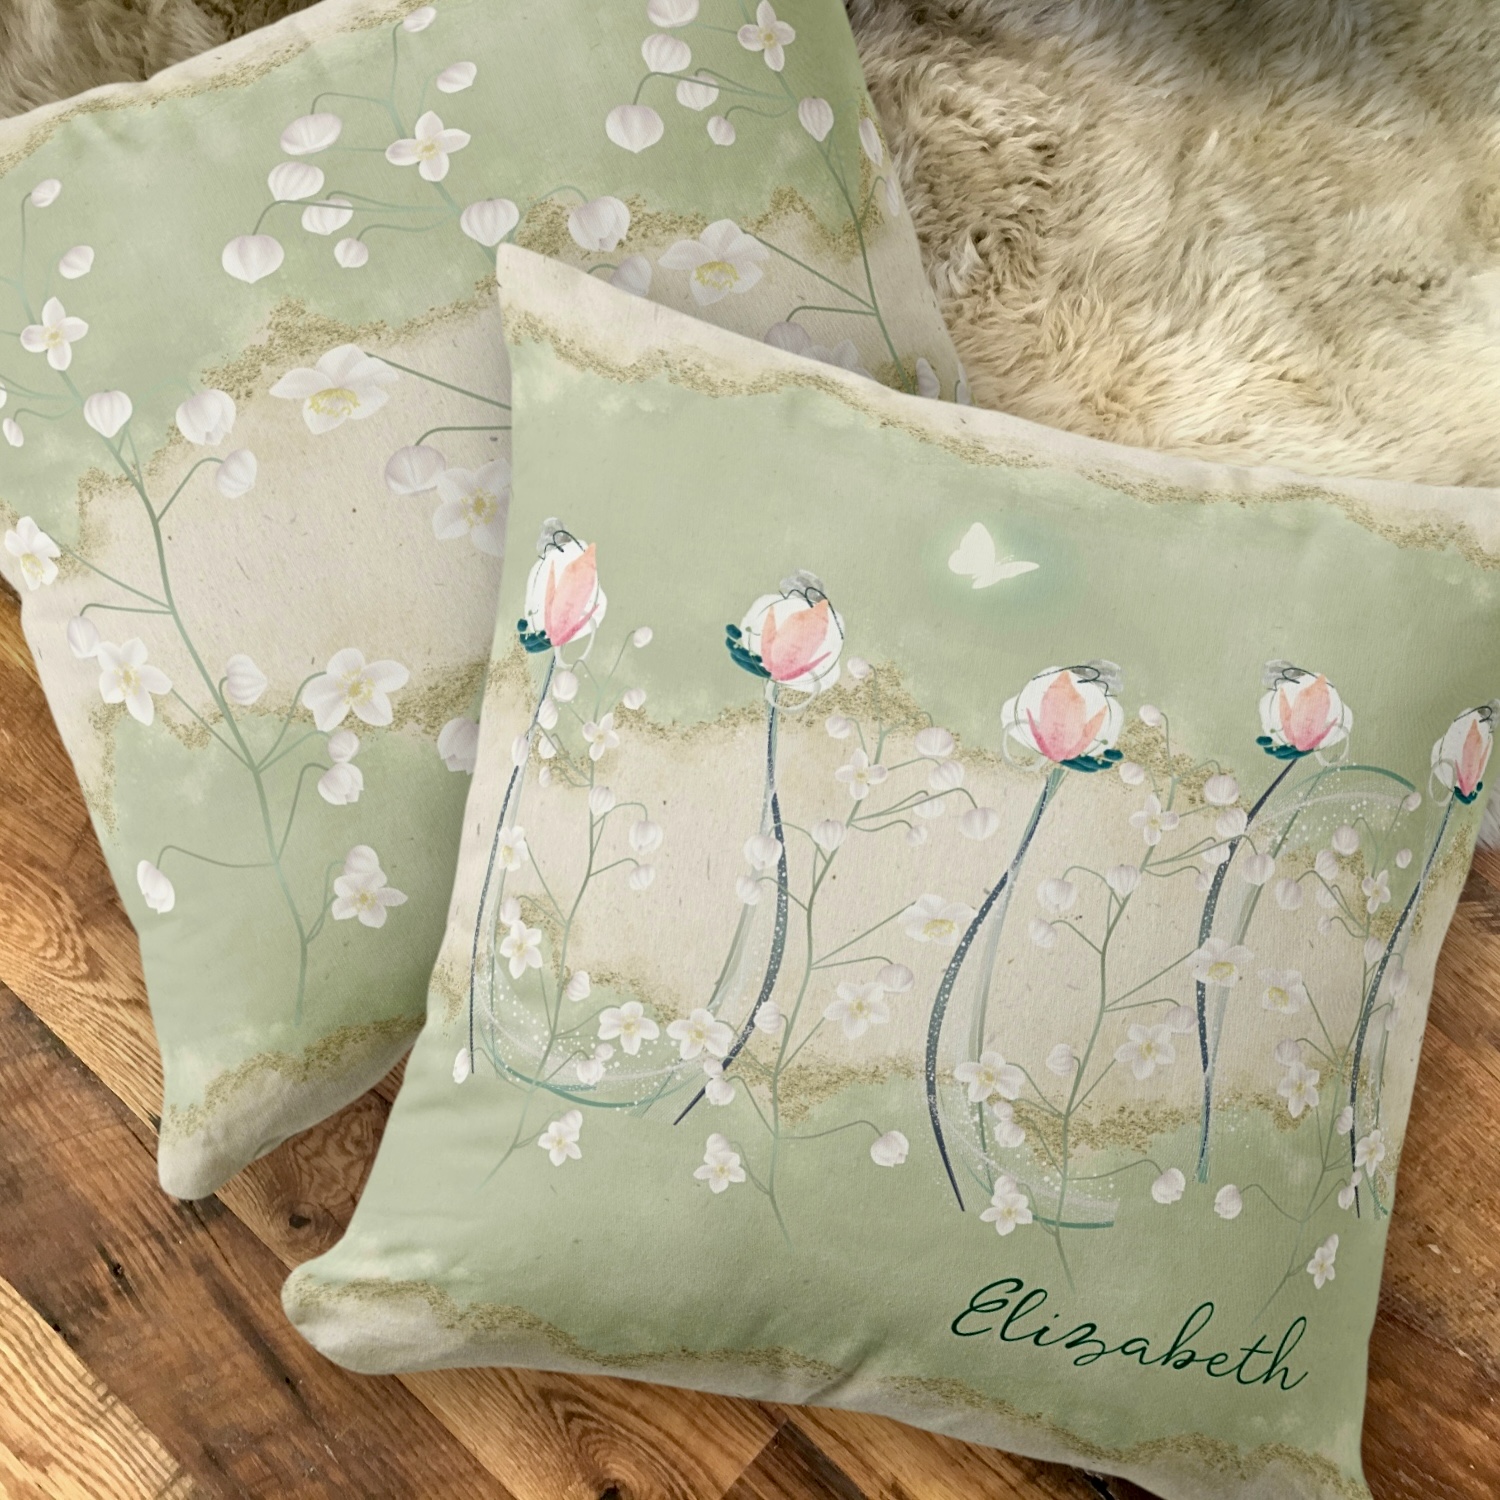 Throw pillow featuring a pattern of delicate white pastel flowers set against a moss green background. The pillow’s bohemian design, with subtle beige accents and an ethereal white butterfly, complements a variety of decor styles. Its soft texture and earthy tones make it an inviting addition to any room, especially in a she shed with throw pillows and mugs that match.